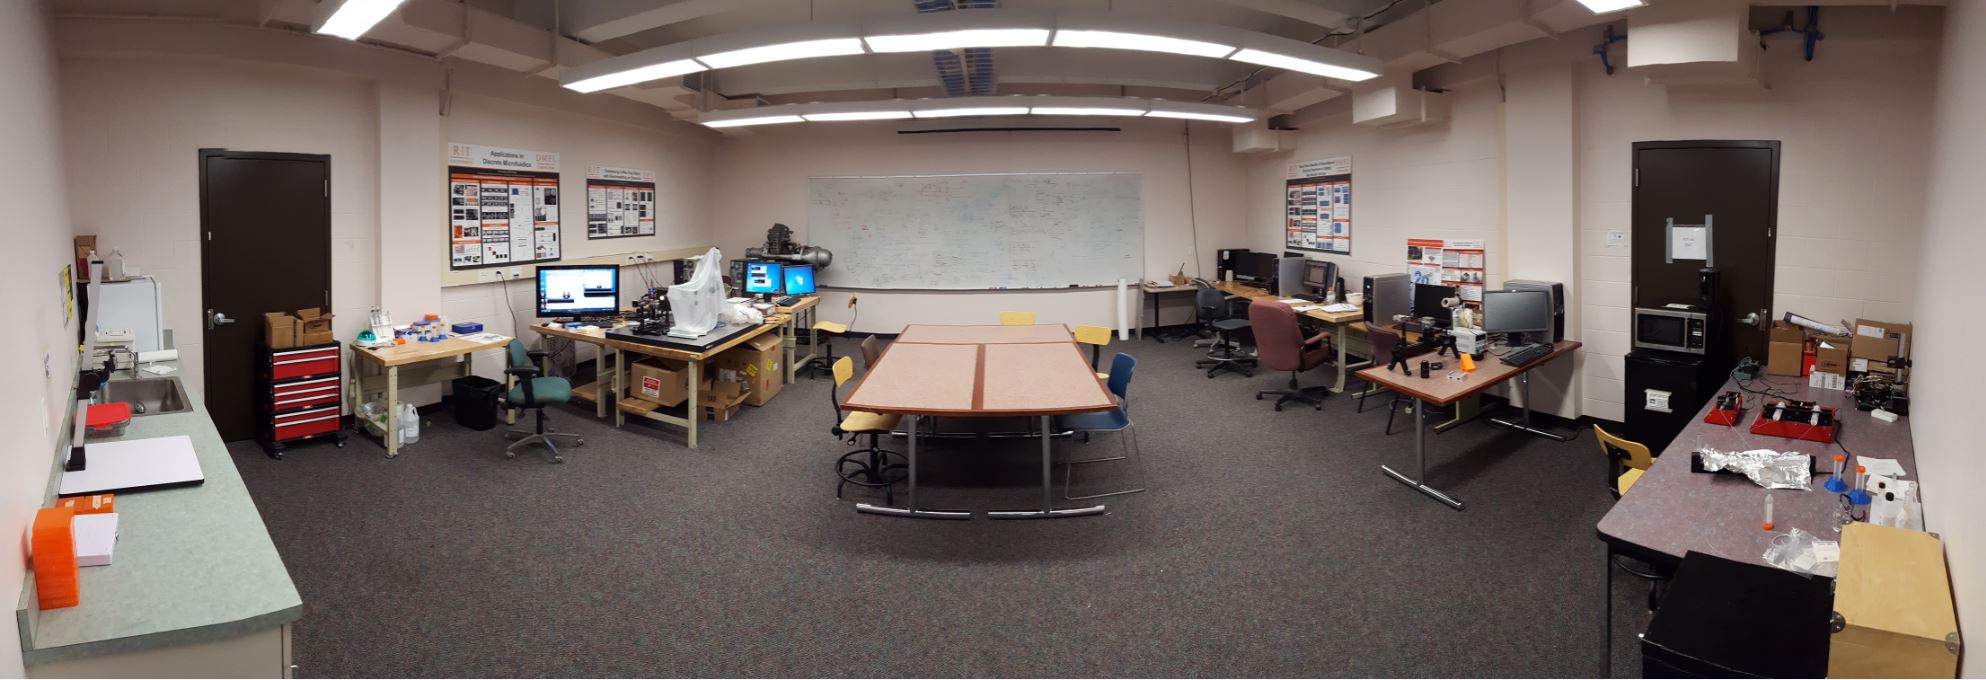 Panorama view of a lab classroom